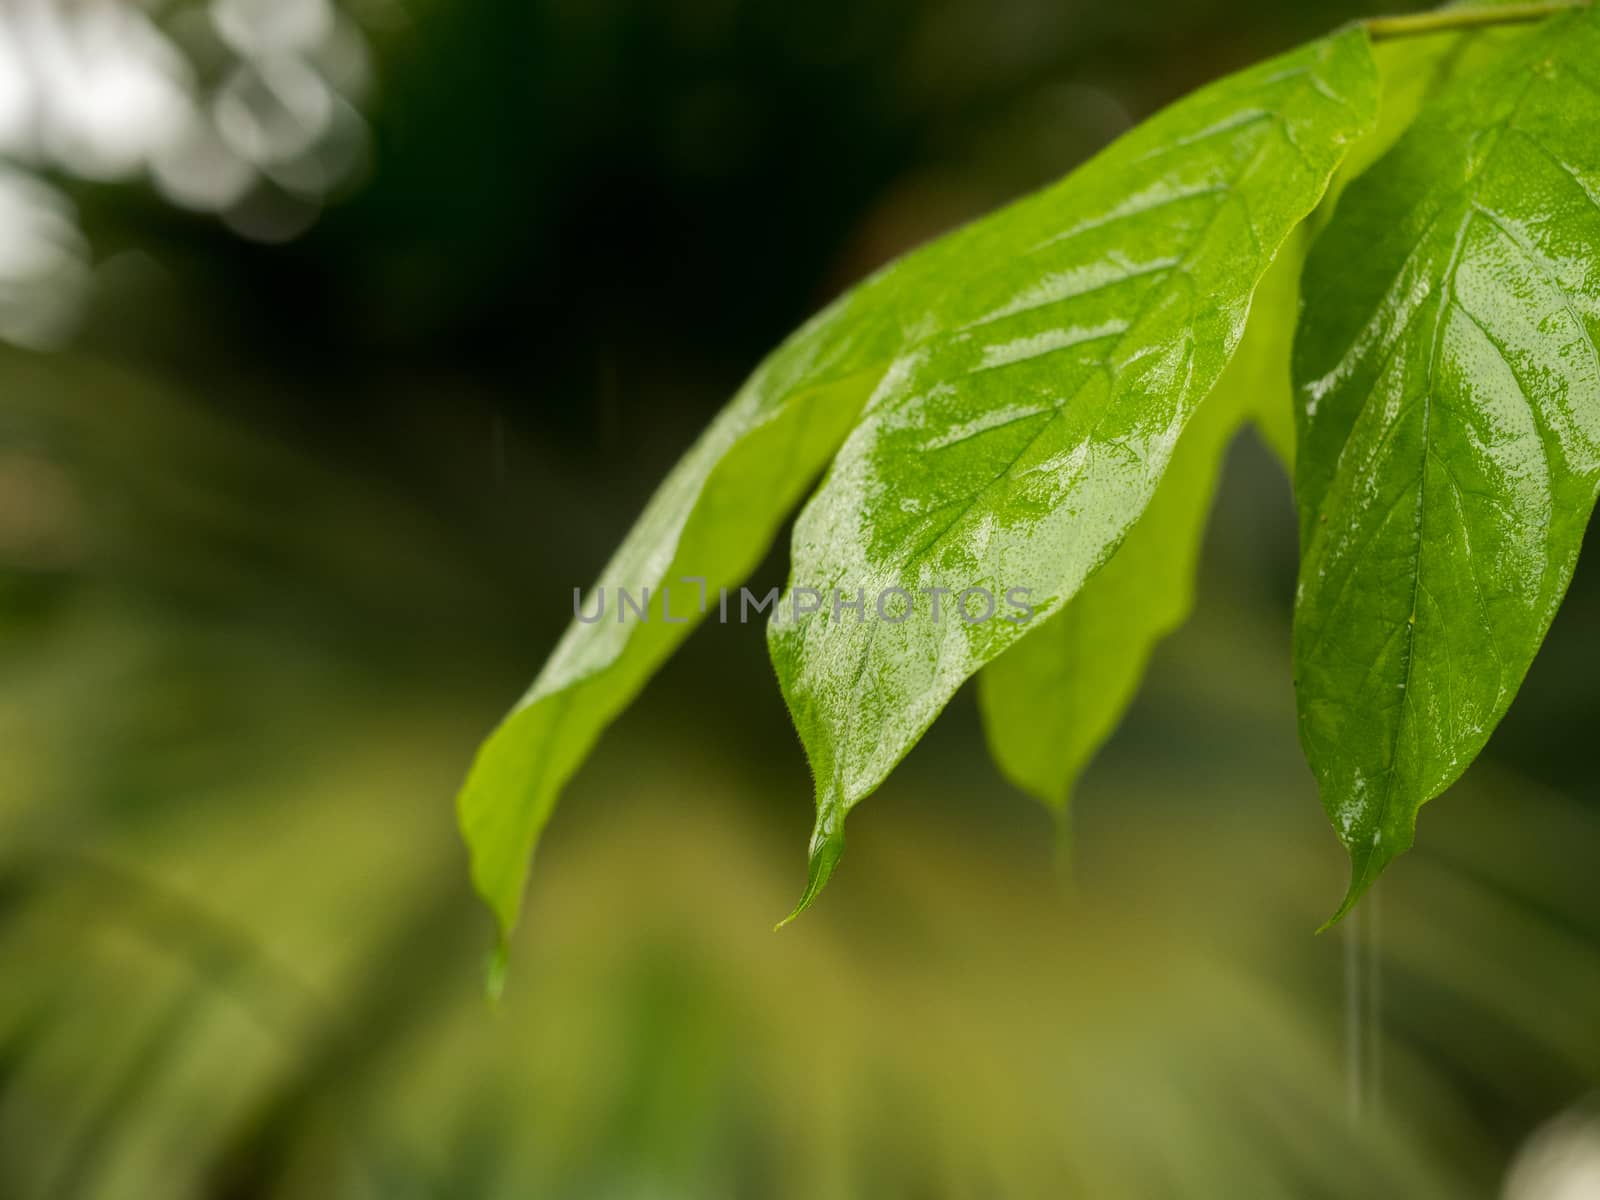 Closeup of a wet green leef in the rain